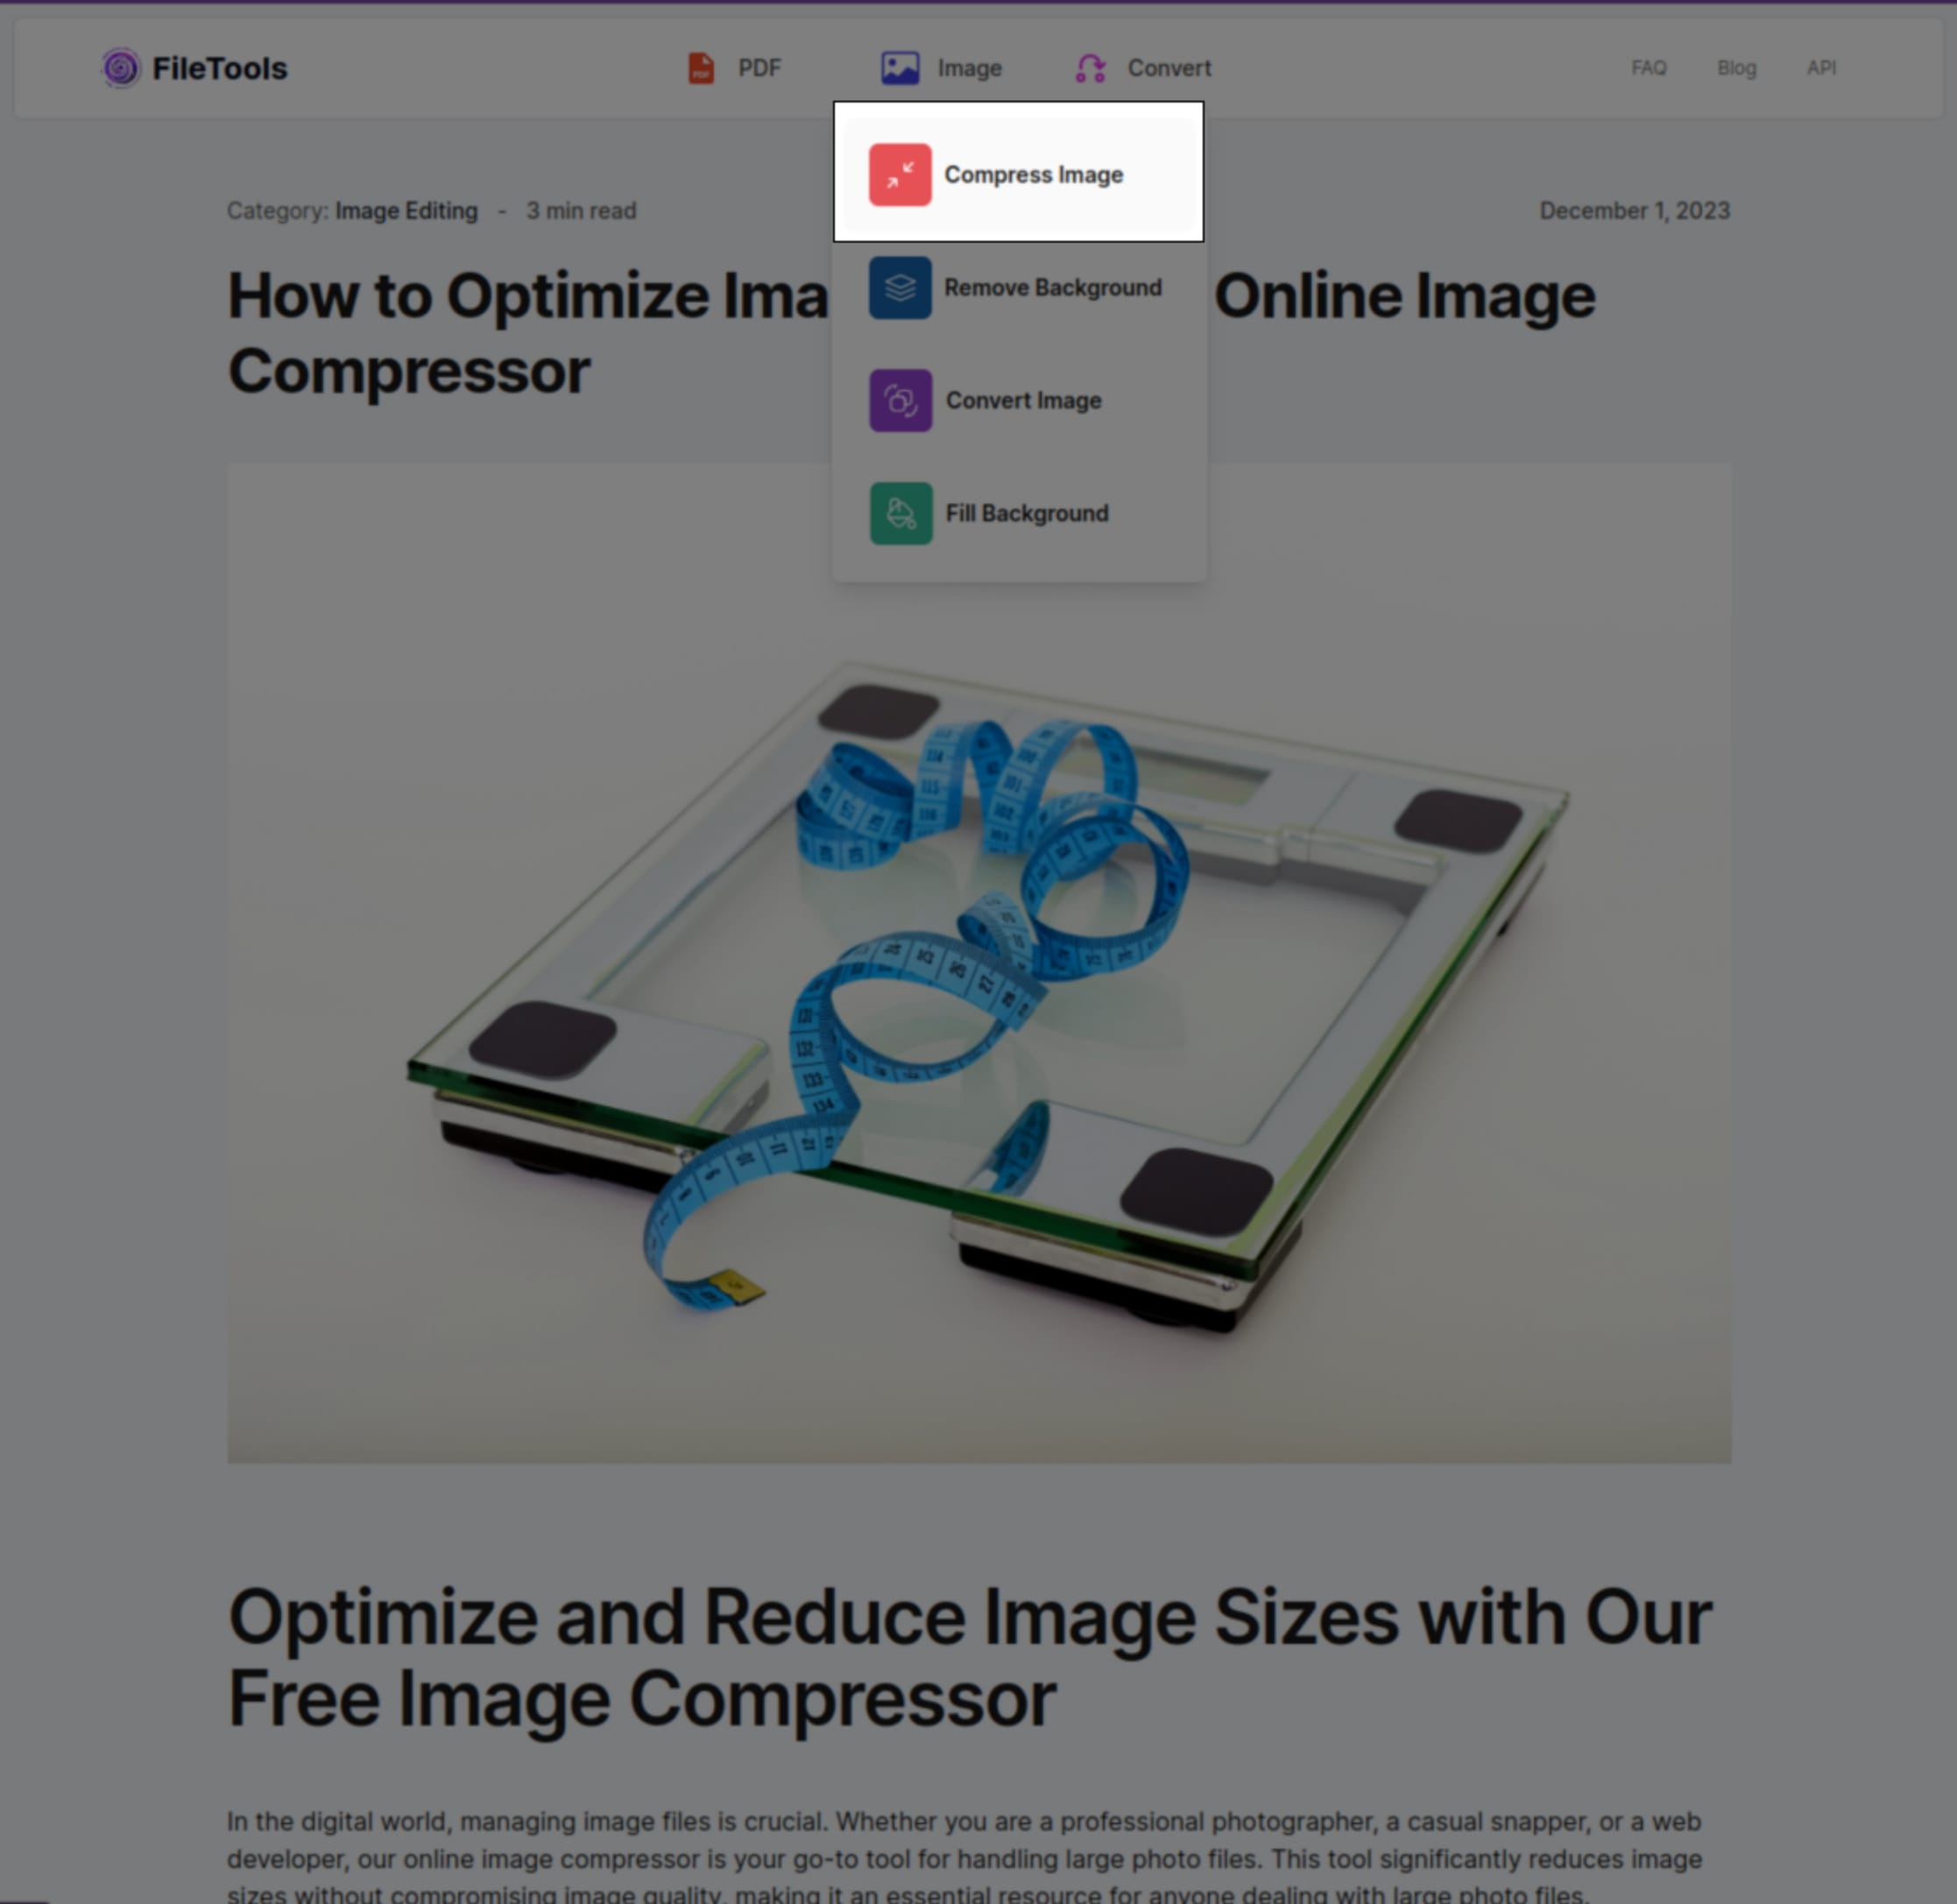 Open Image Compress Tool